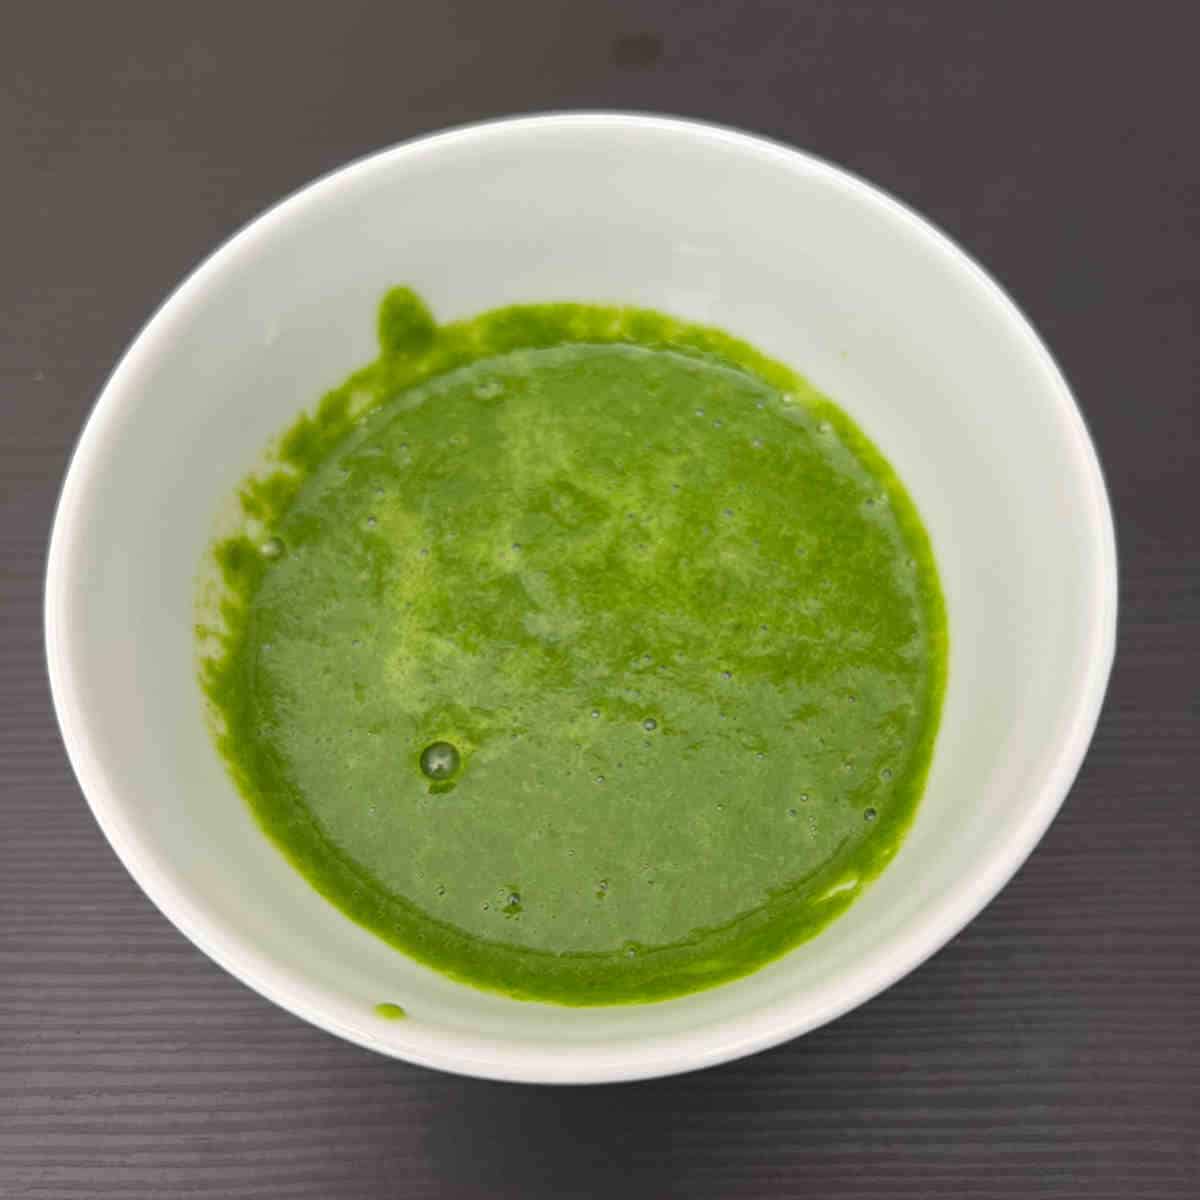 Grind green chutney ingredients into smooth paste.